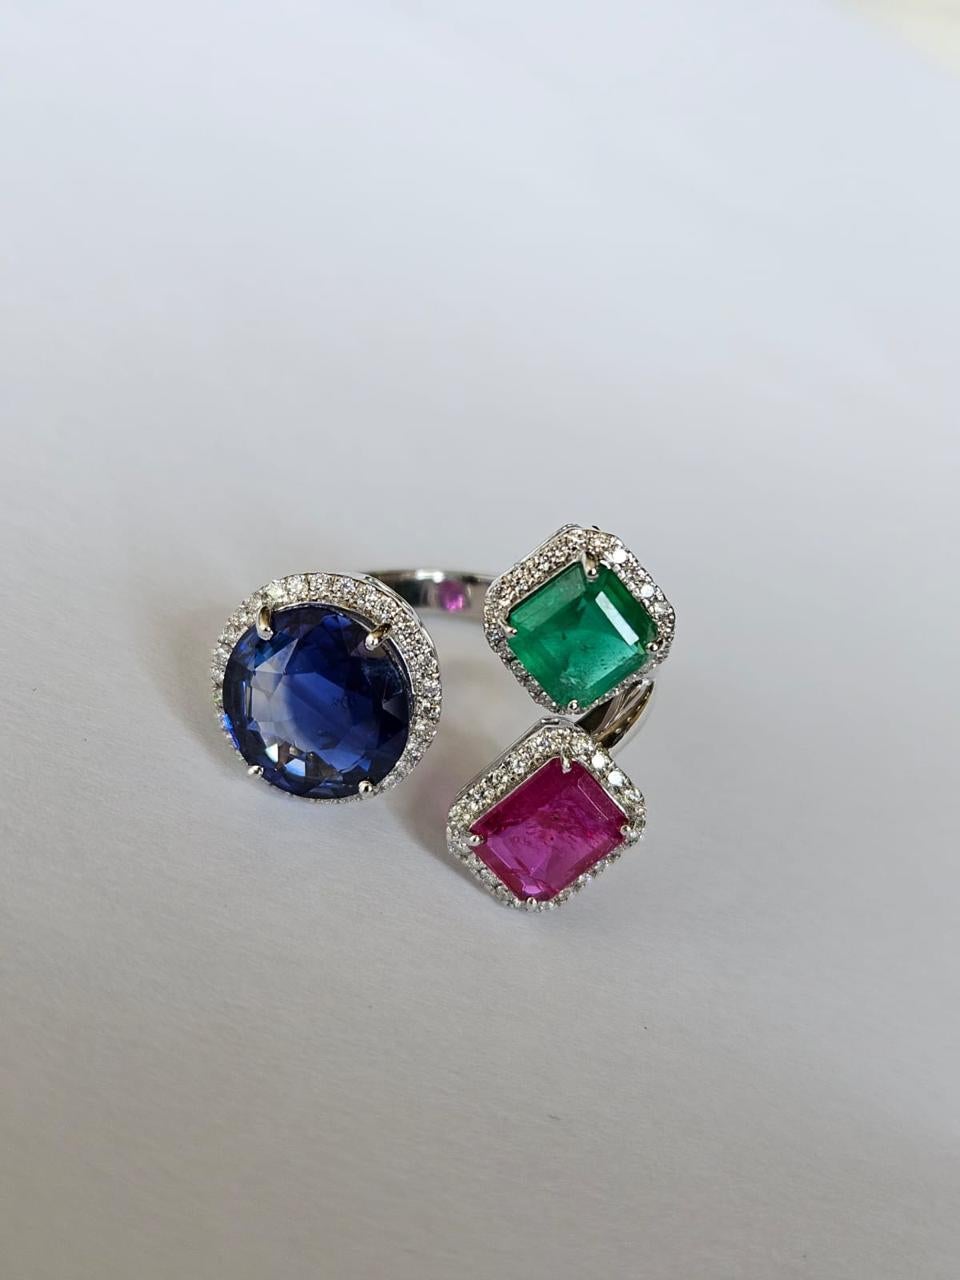 Set in 18K Gold, natural Blue Sapphire, Emerald, Ruby & Diamond Three-Stone Ring For Sale 4